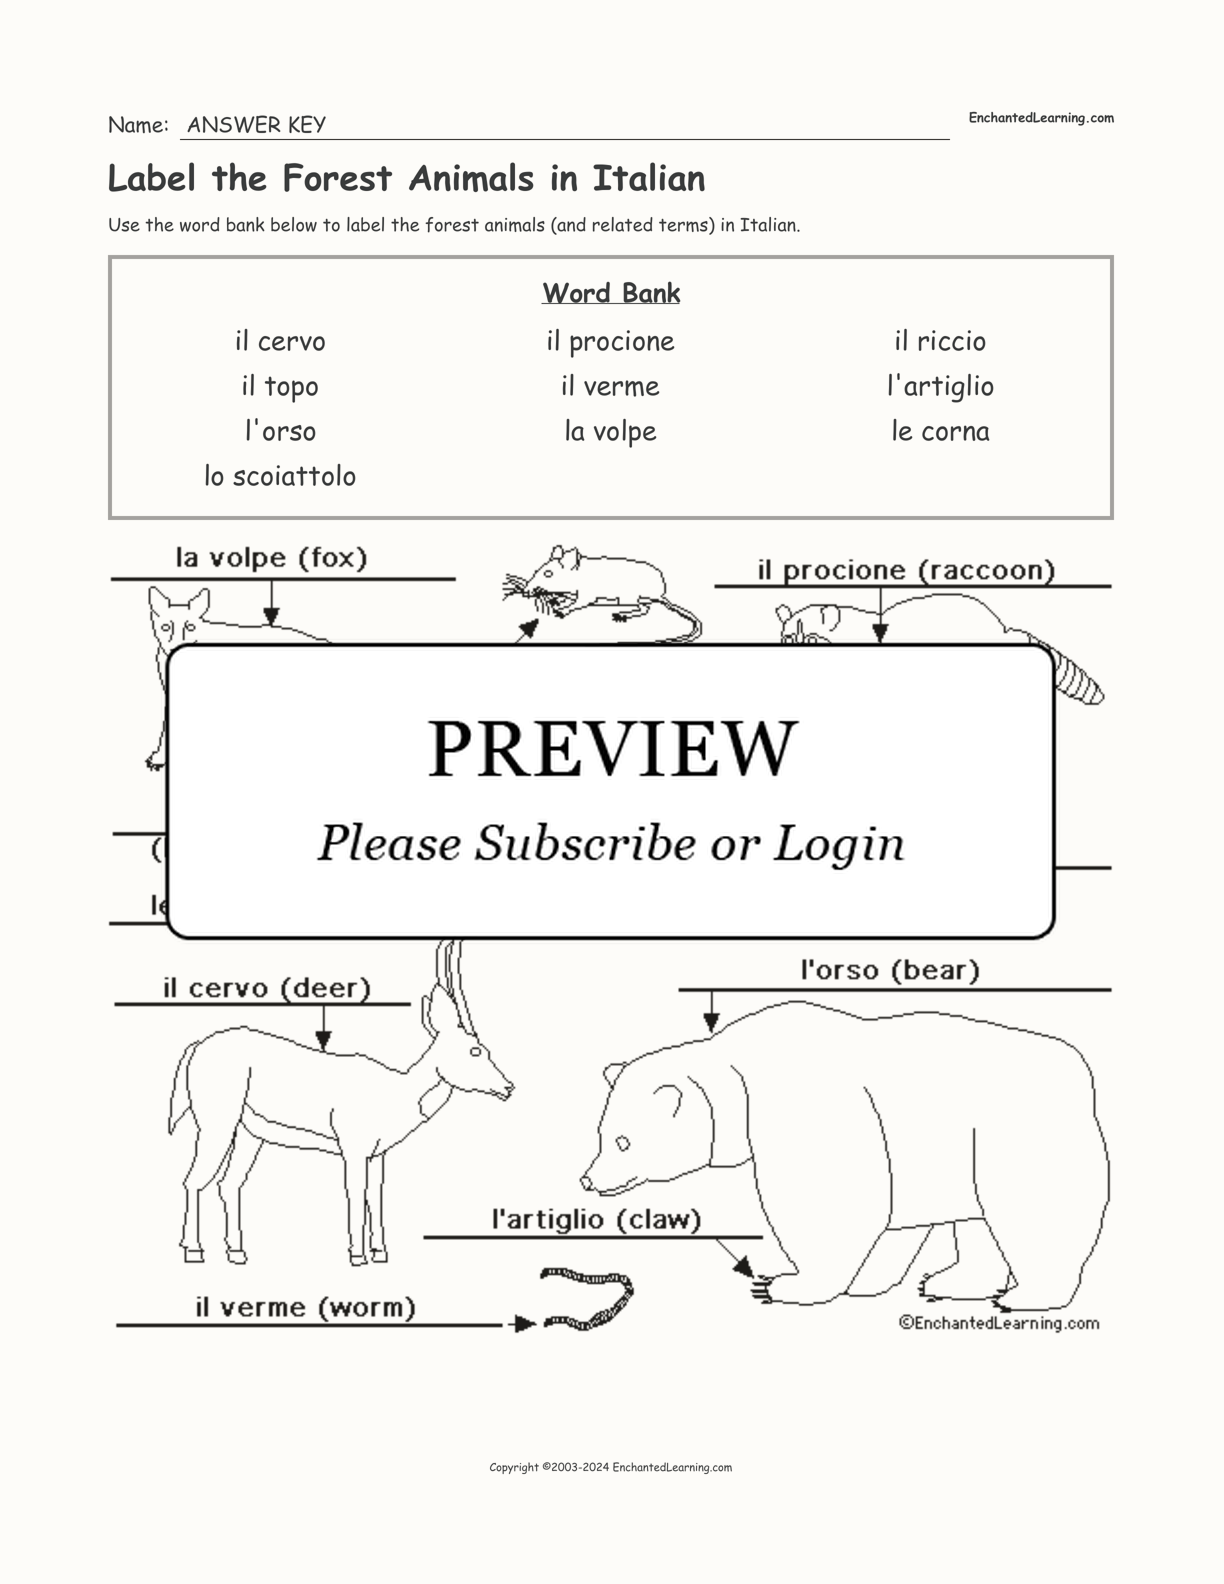 Label the Forest Animals in Italian interactive worksheet page 2